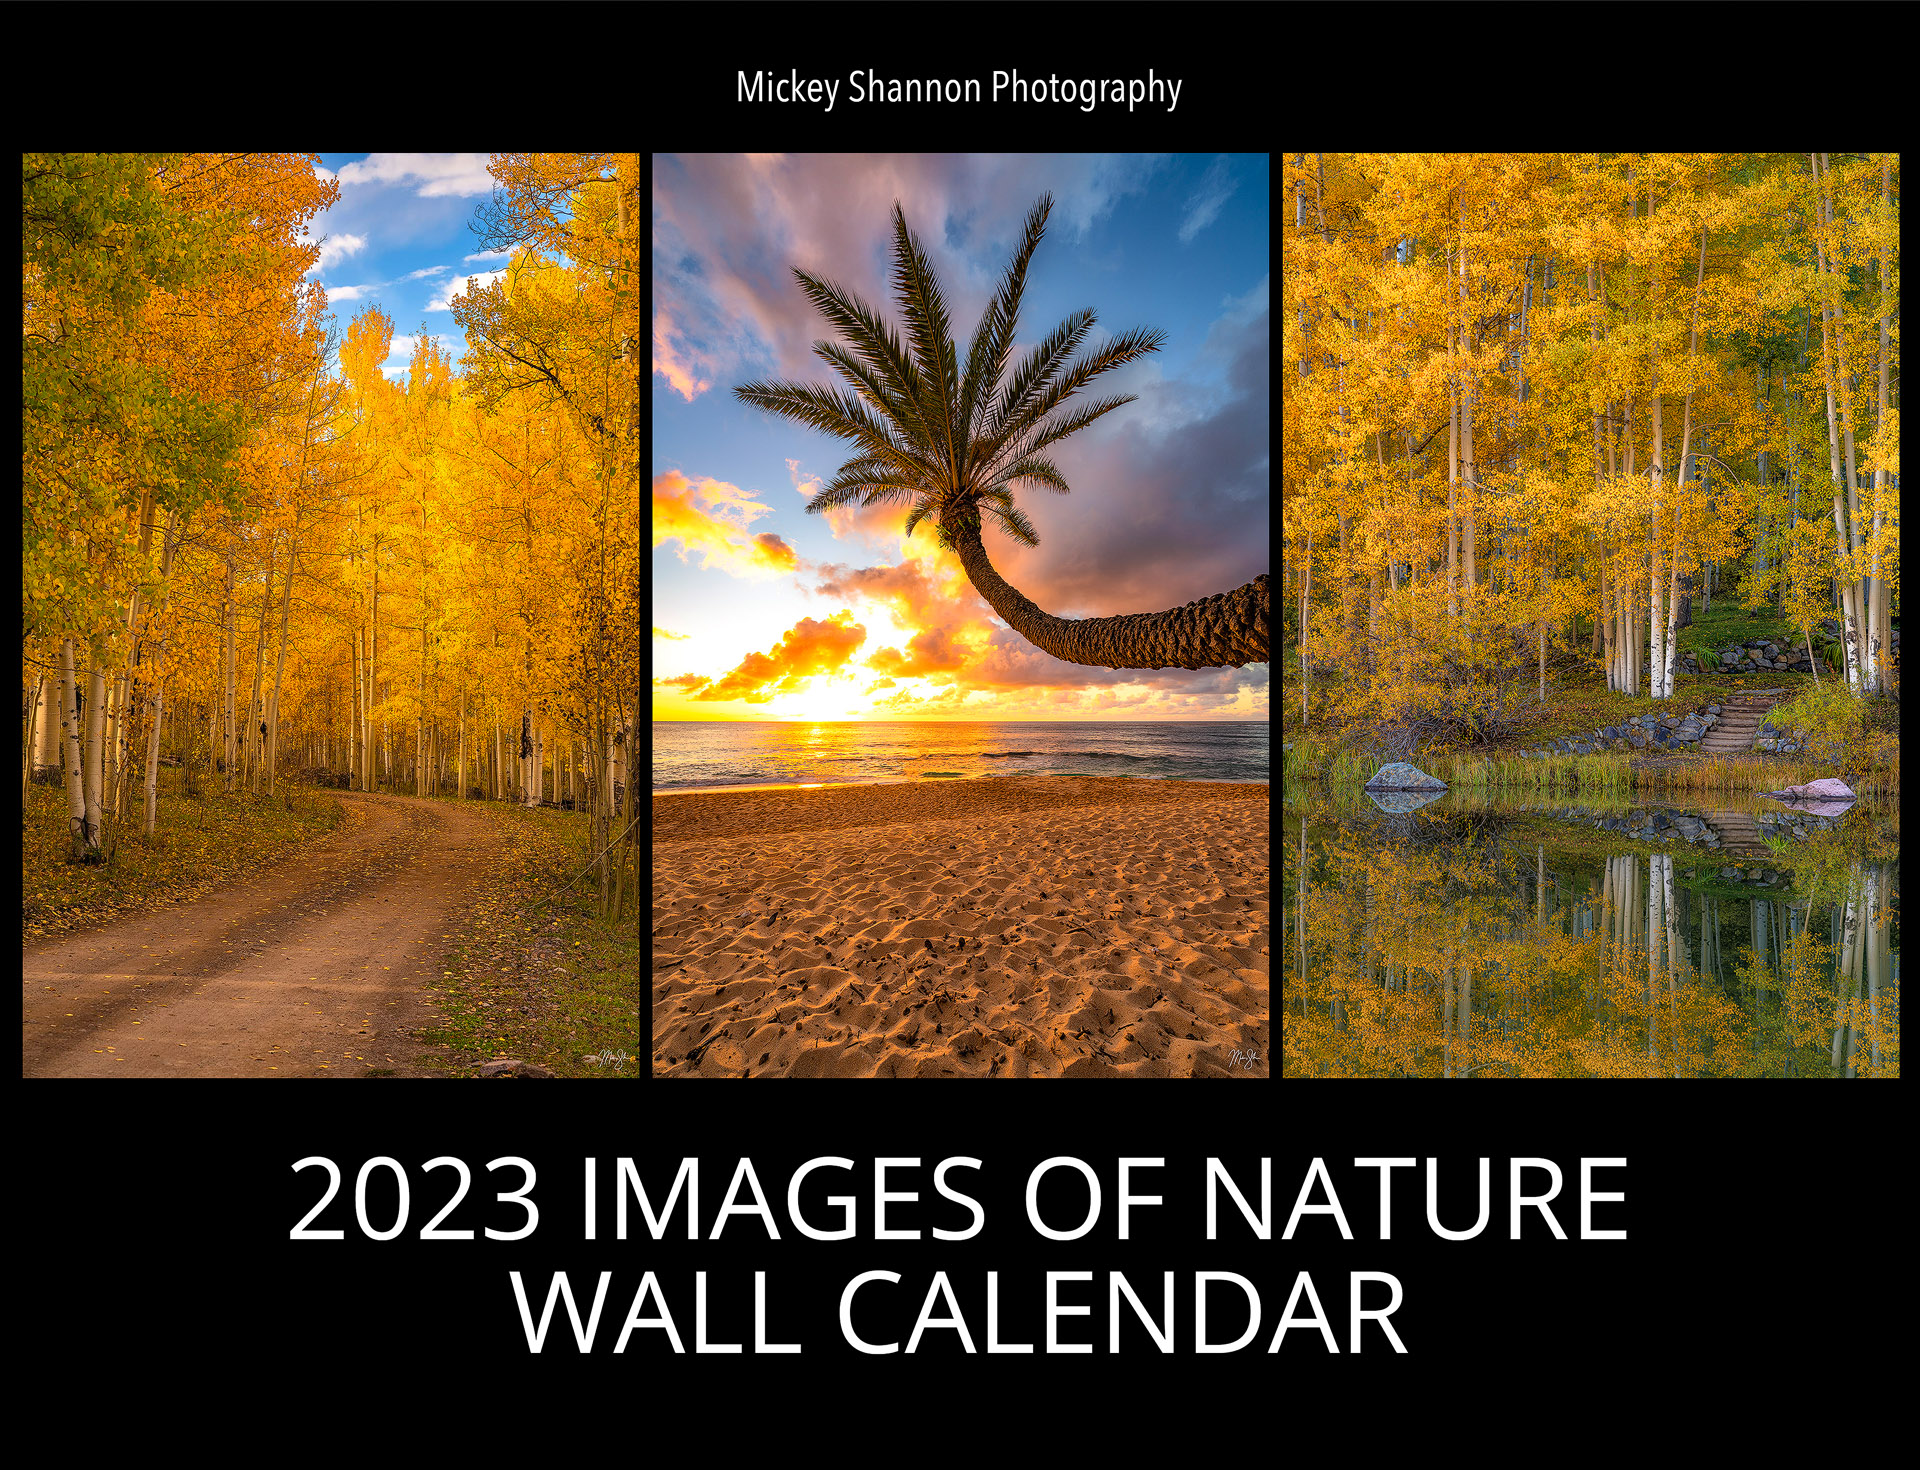 2023 Images of Nature Wall Calendar